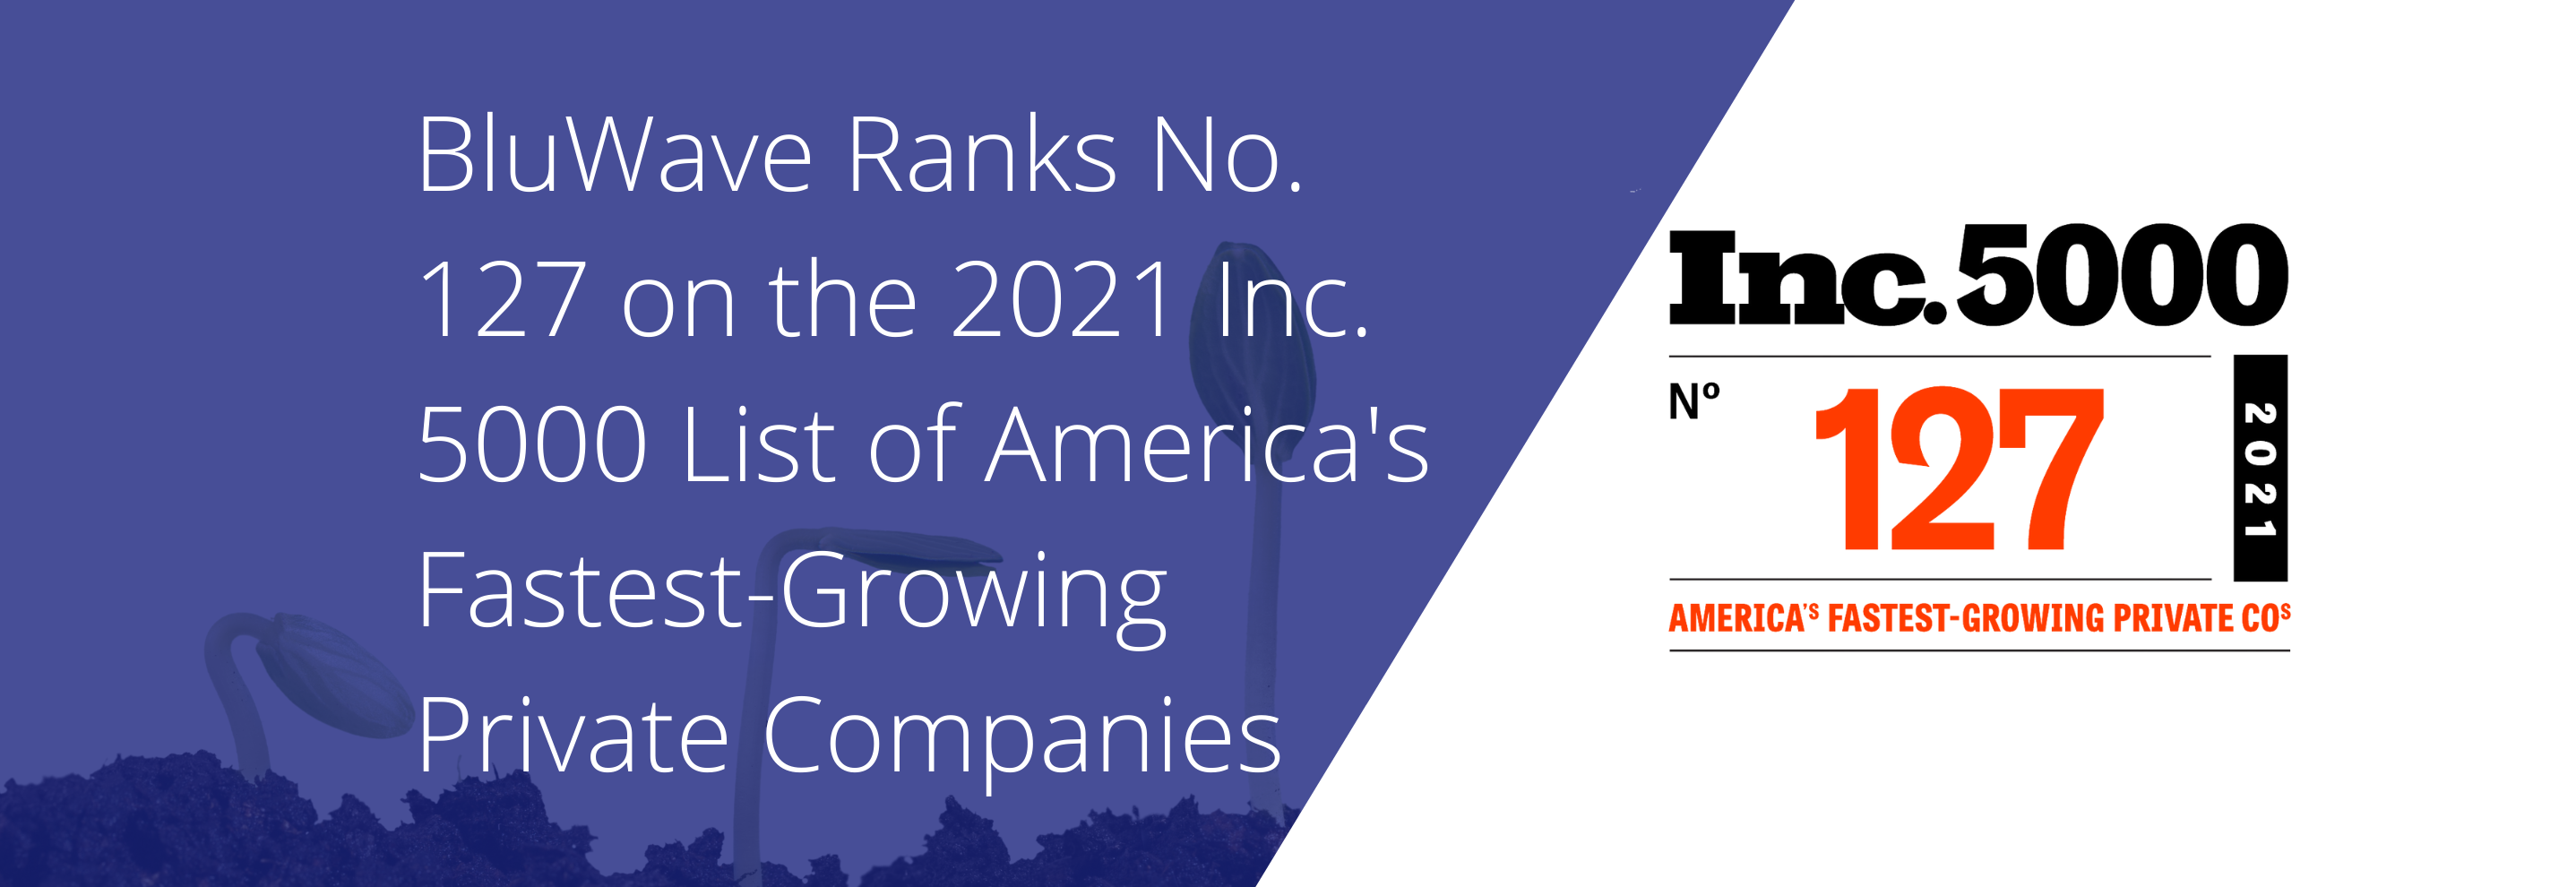 BluWave Ranks No. 127 on the 2021 Inc 5000 Annual List of America’s Fastest-Growing Private Companies